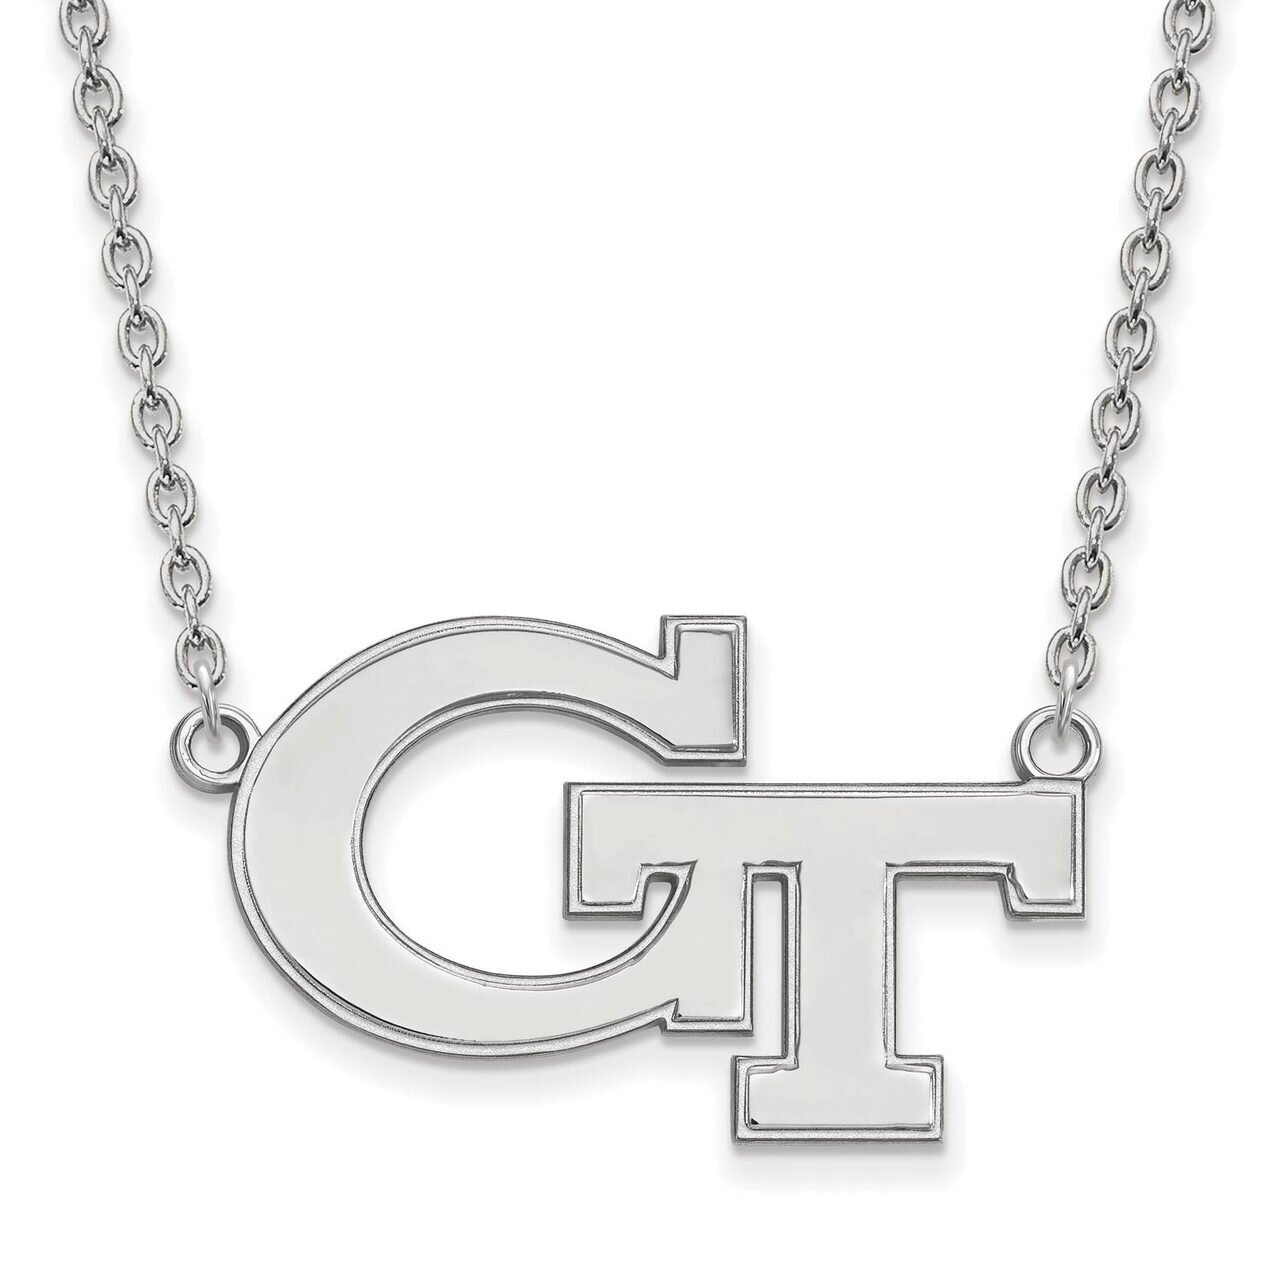 Georgia Institute of Technology Large Pendant with Chain Necklace 10k White Gold 1W010GT-18